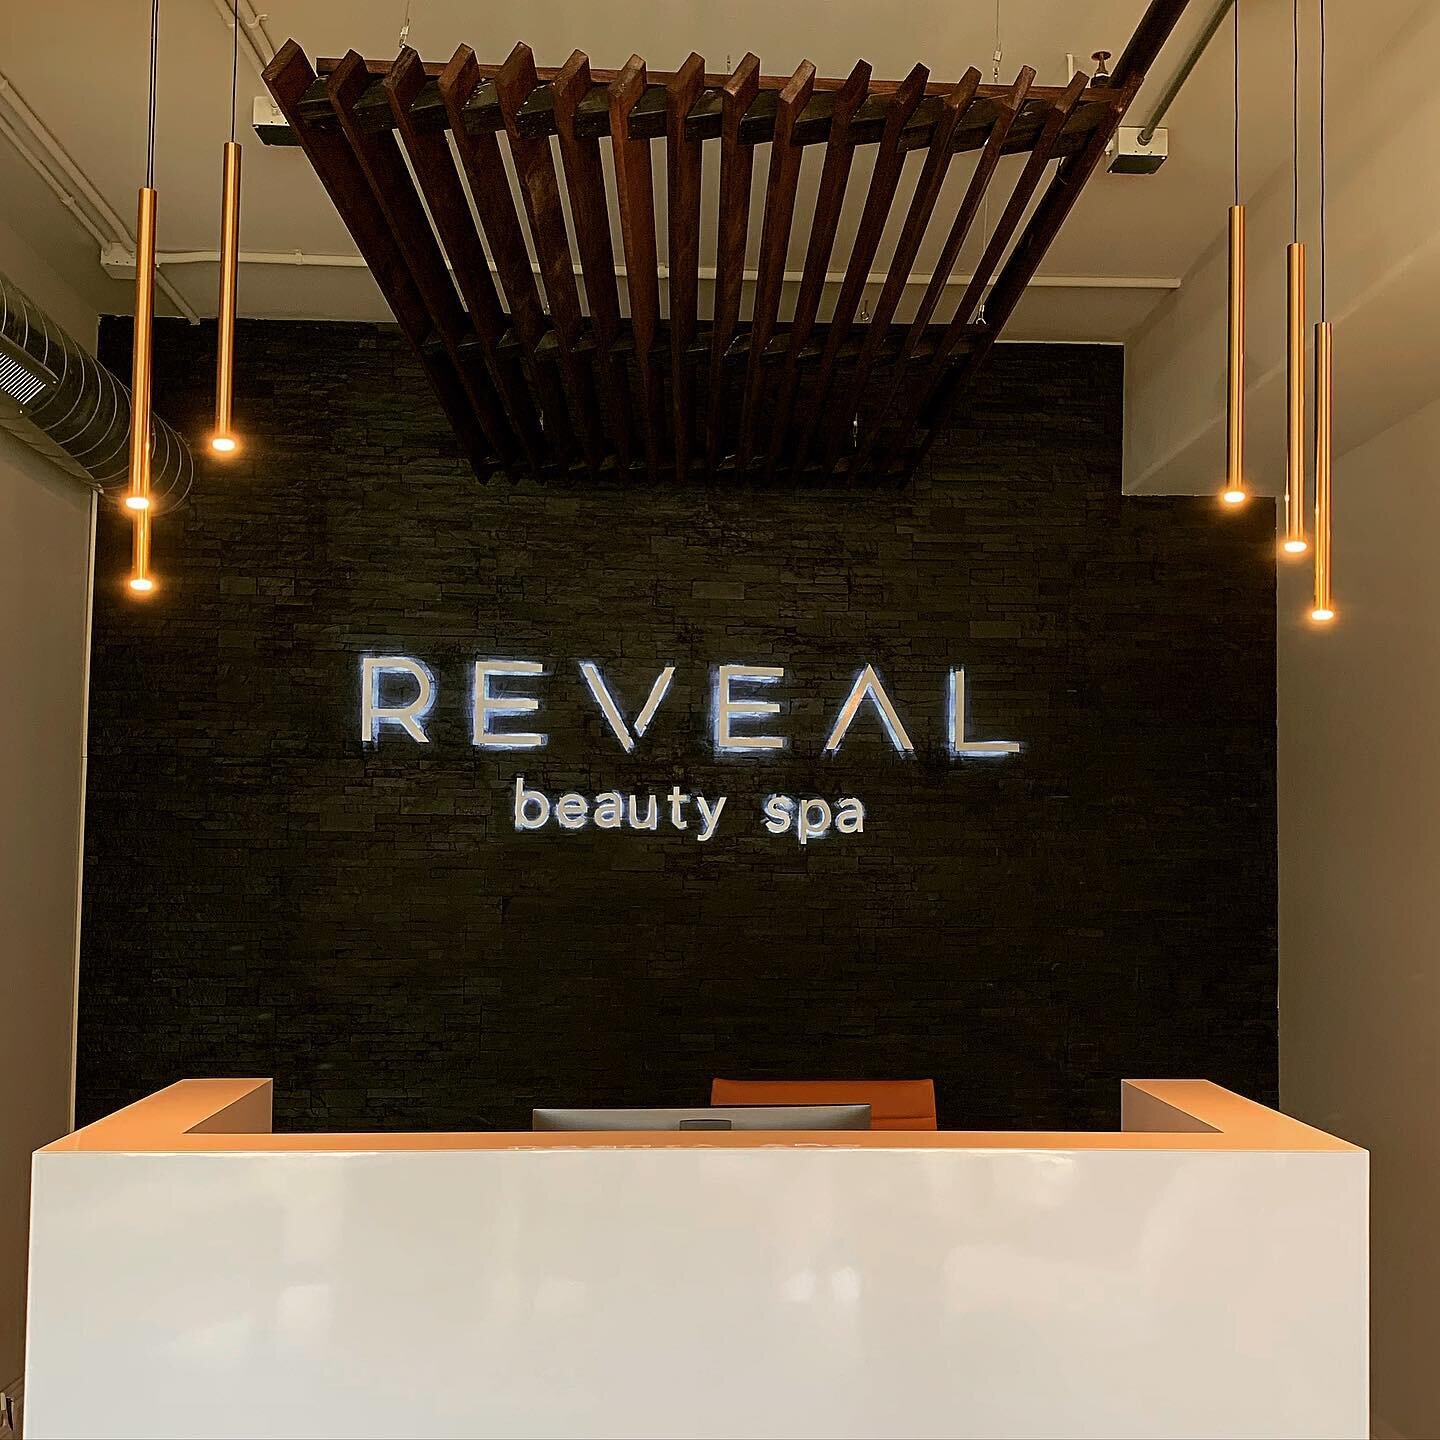 REVEAL Beauty Spa is a collaborative spa in Waunakee, WI. We currently offer permanent make up and skincare services and are expanding our service menu based on the needs of our clients. We'd love to hear what services you're looking for - we can't w